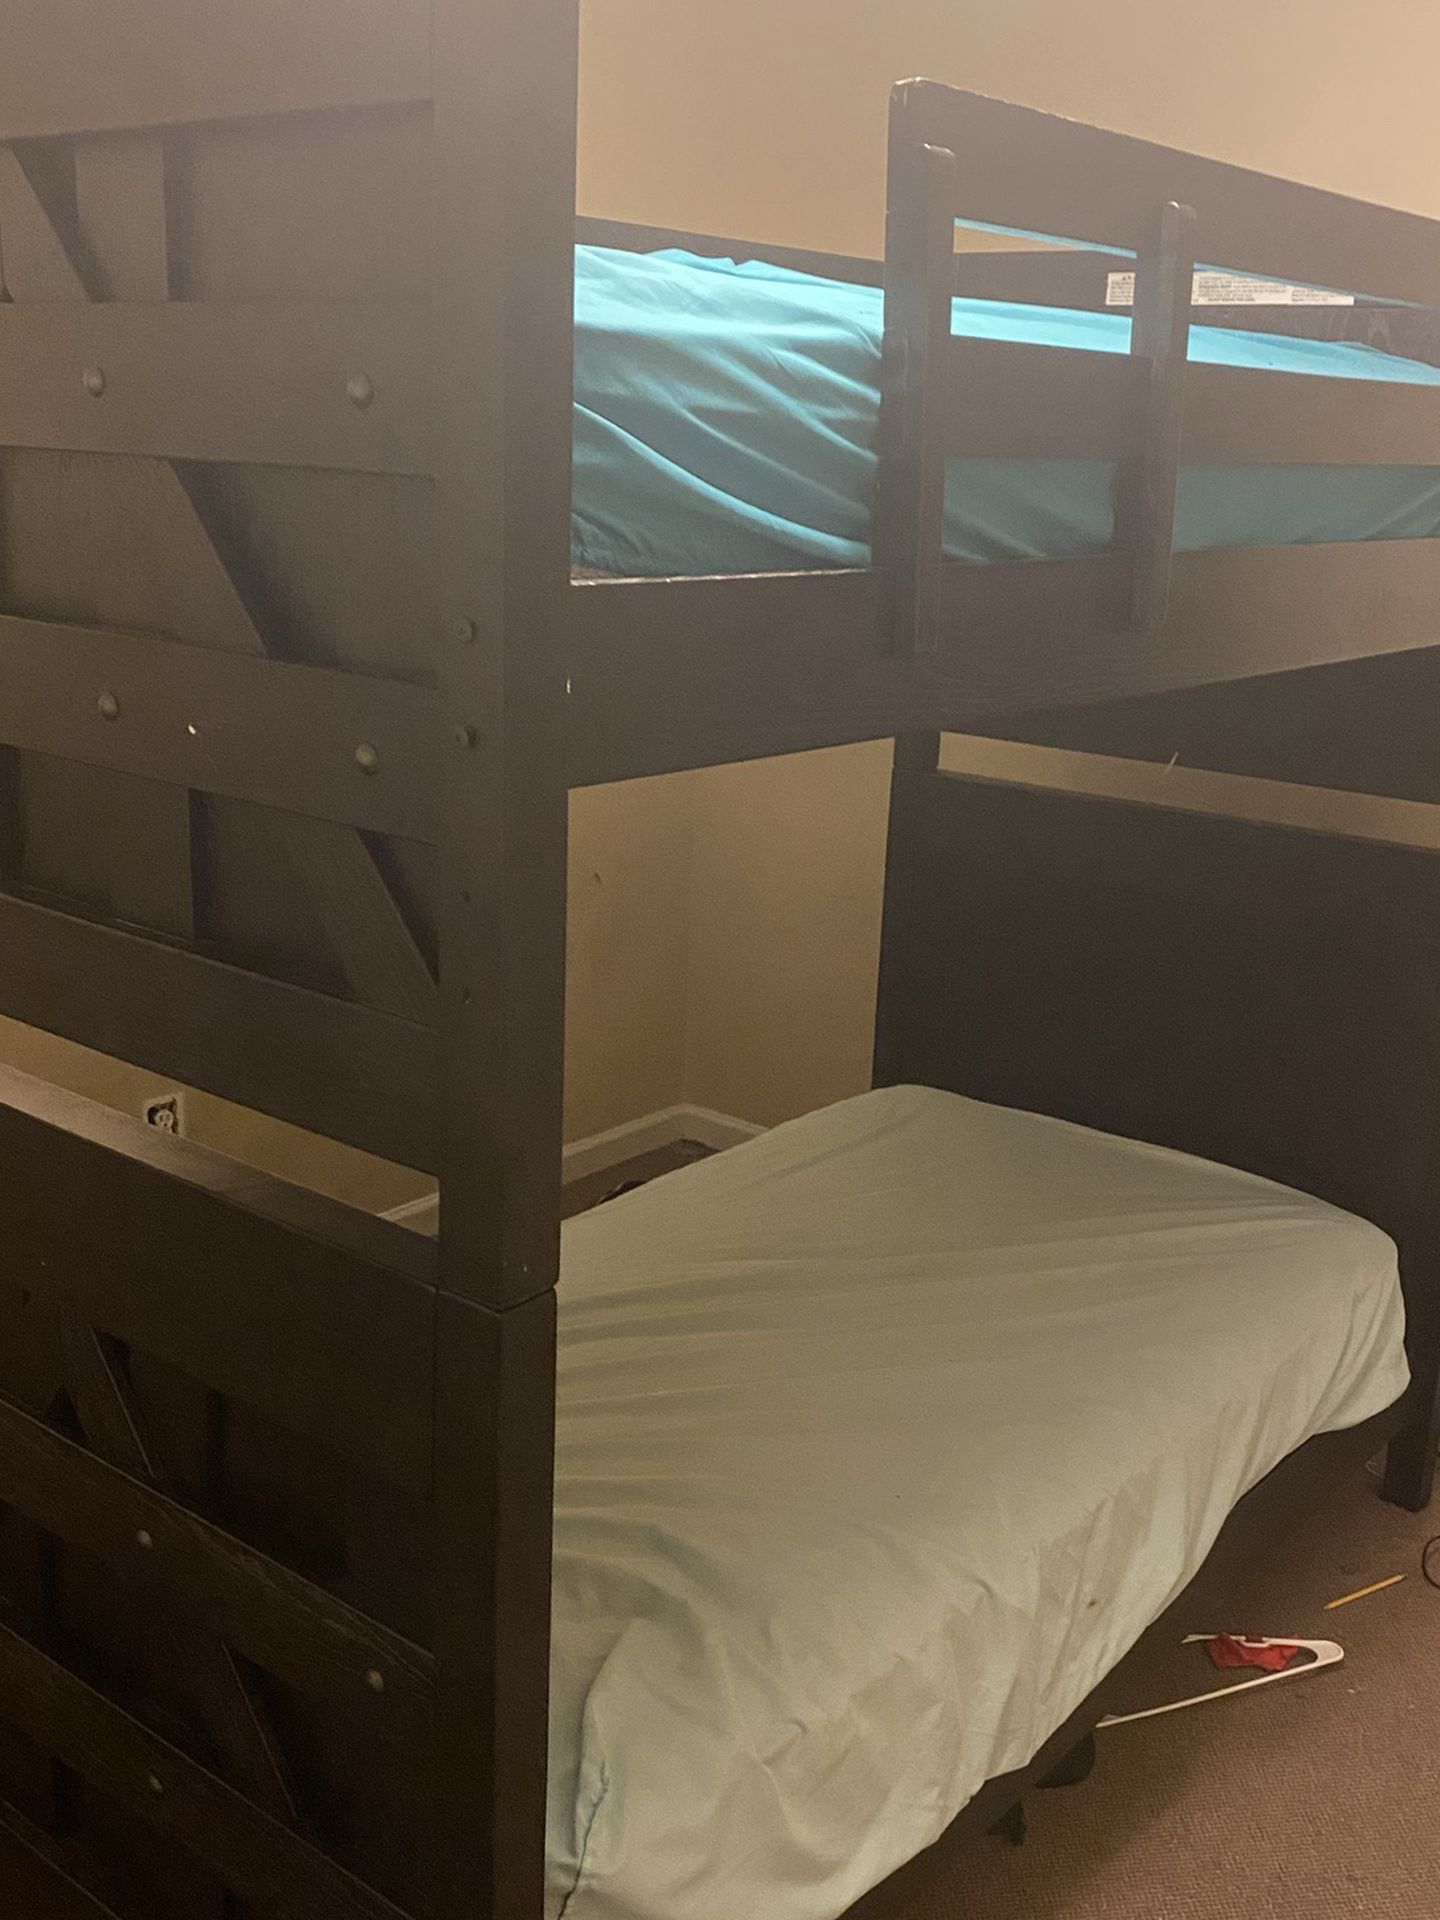 Like New Bunk Bed